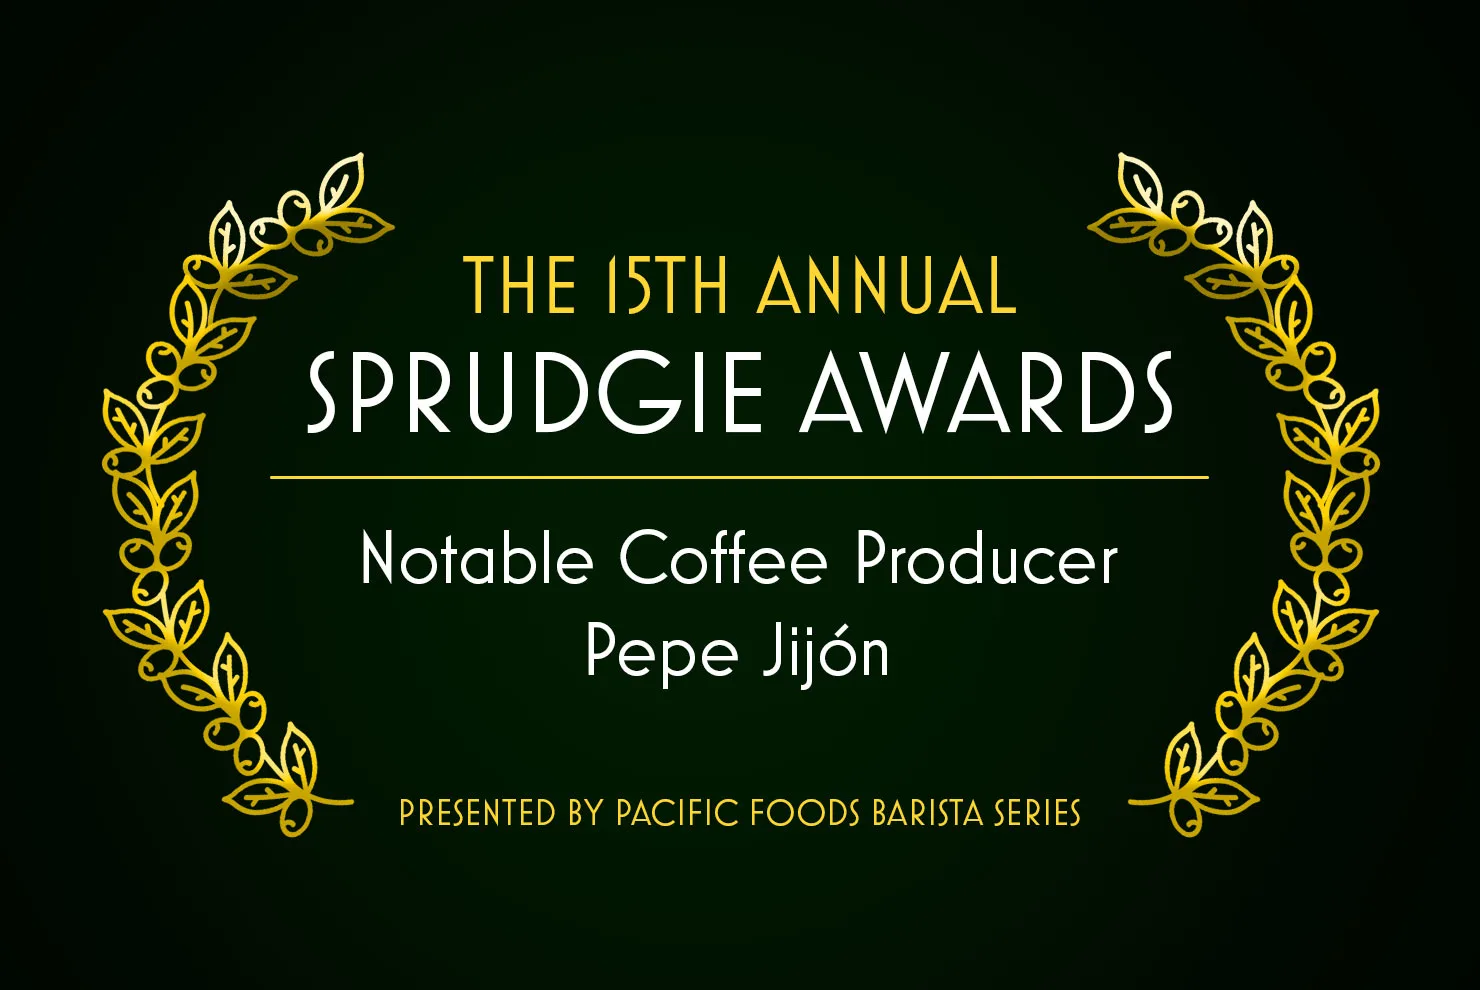 sprudgie awards 15 notable coffee producer